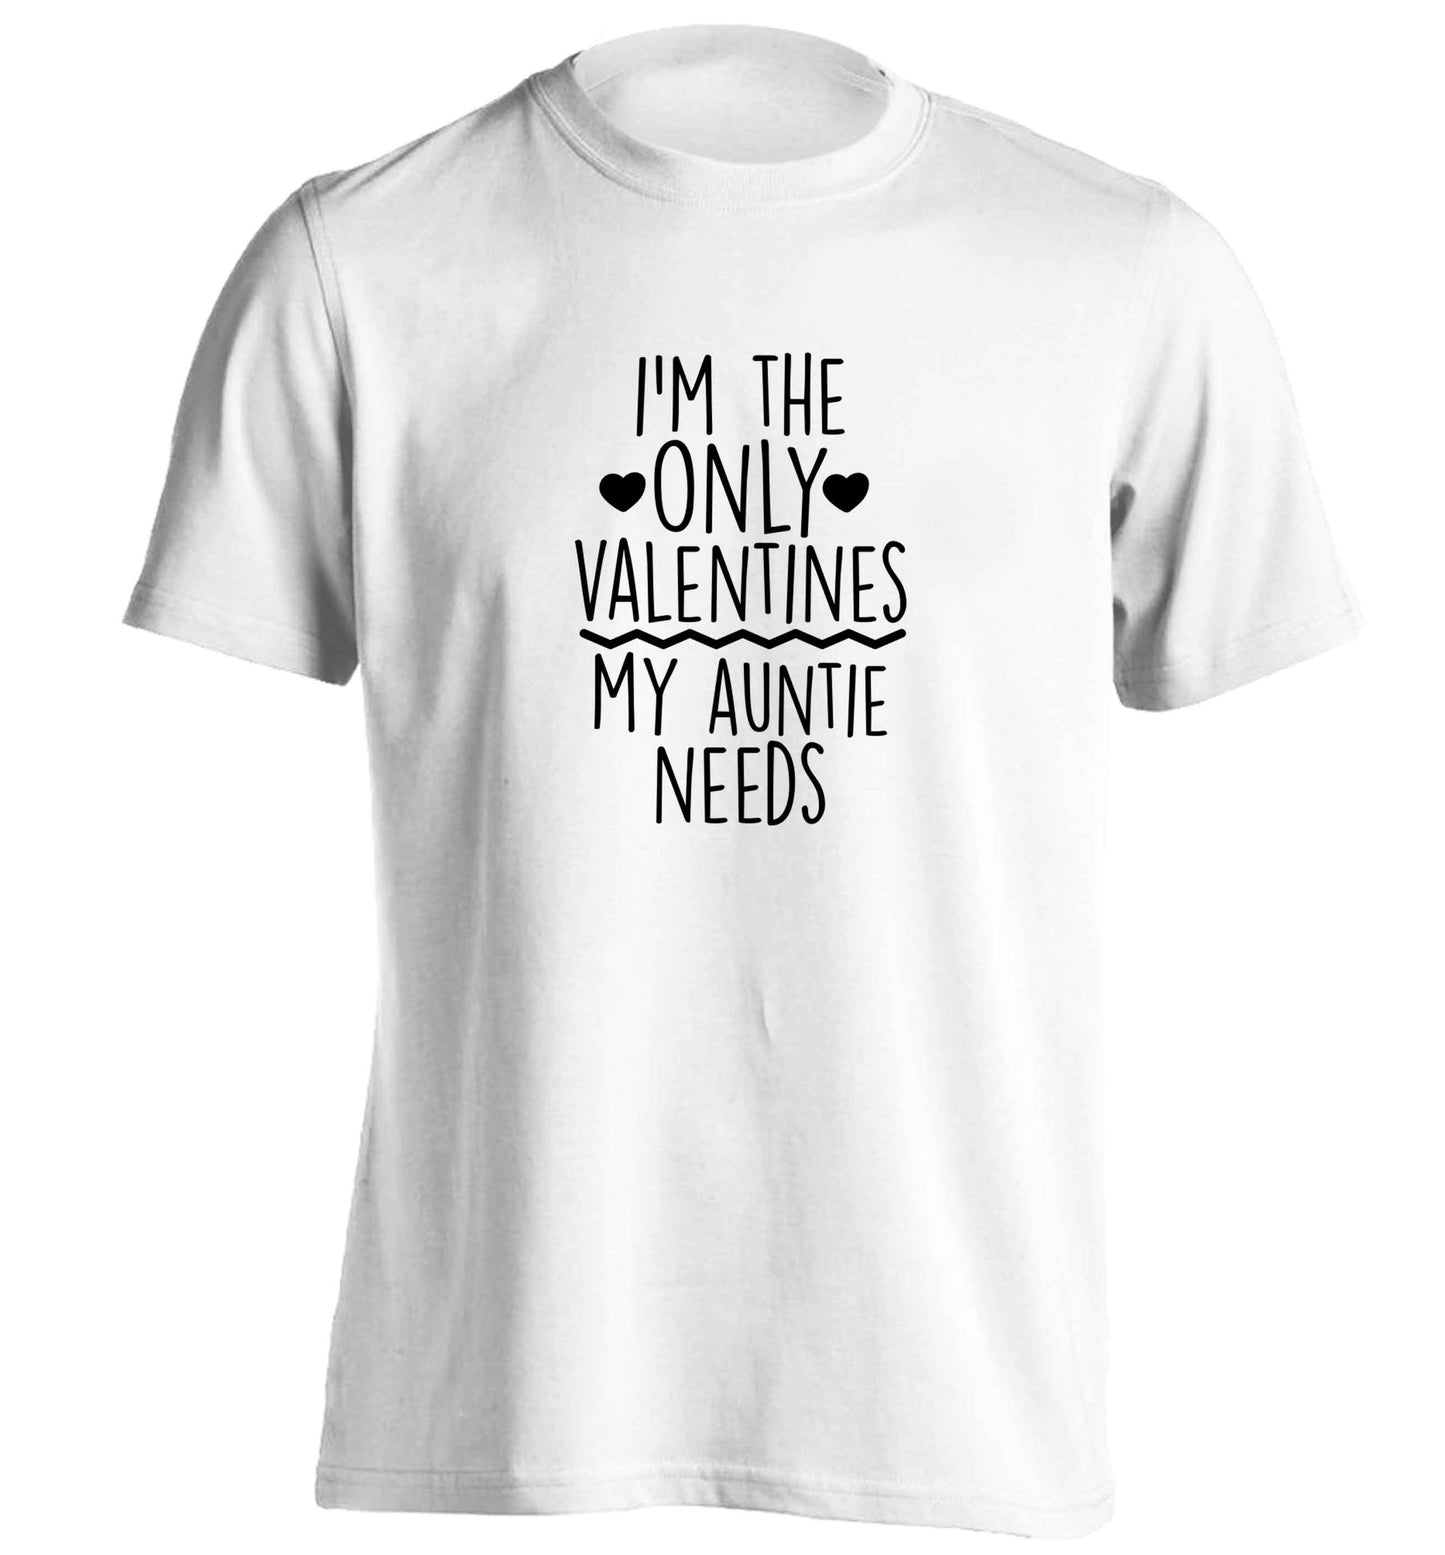 I'm the only valentines my auntie needs adults unisex white Tshirt 2XL